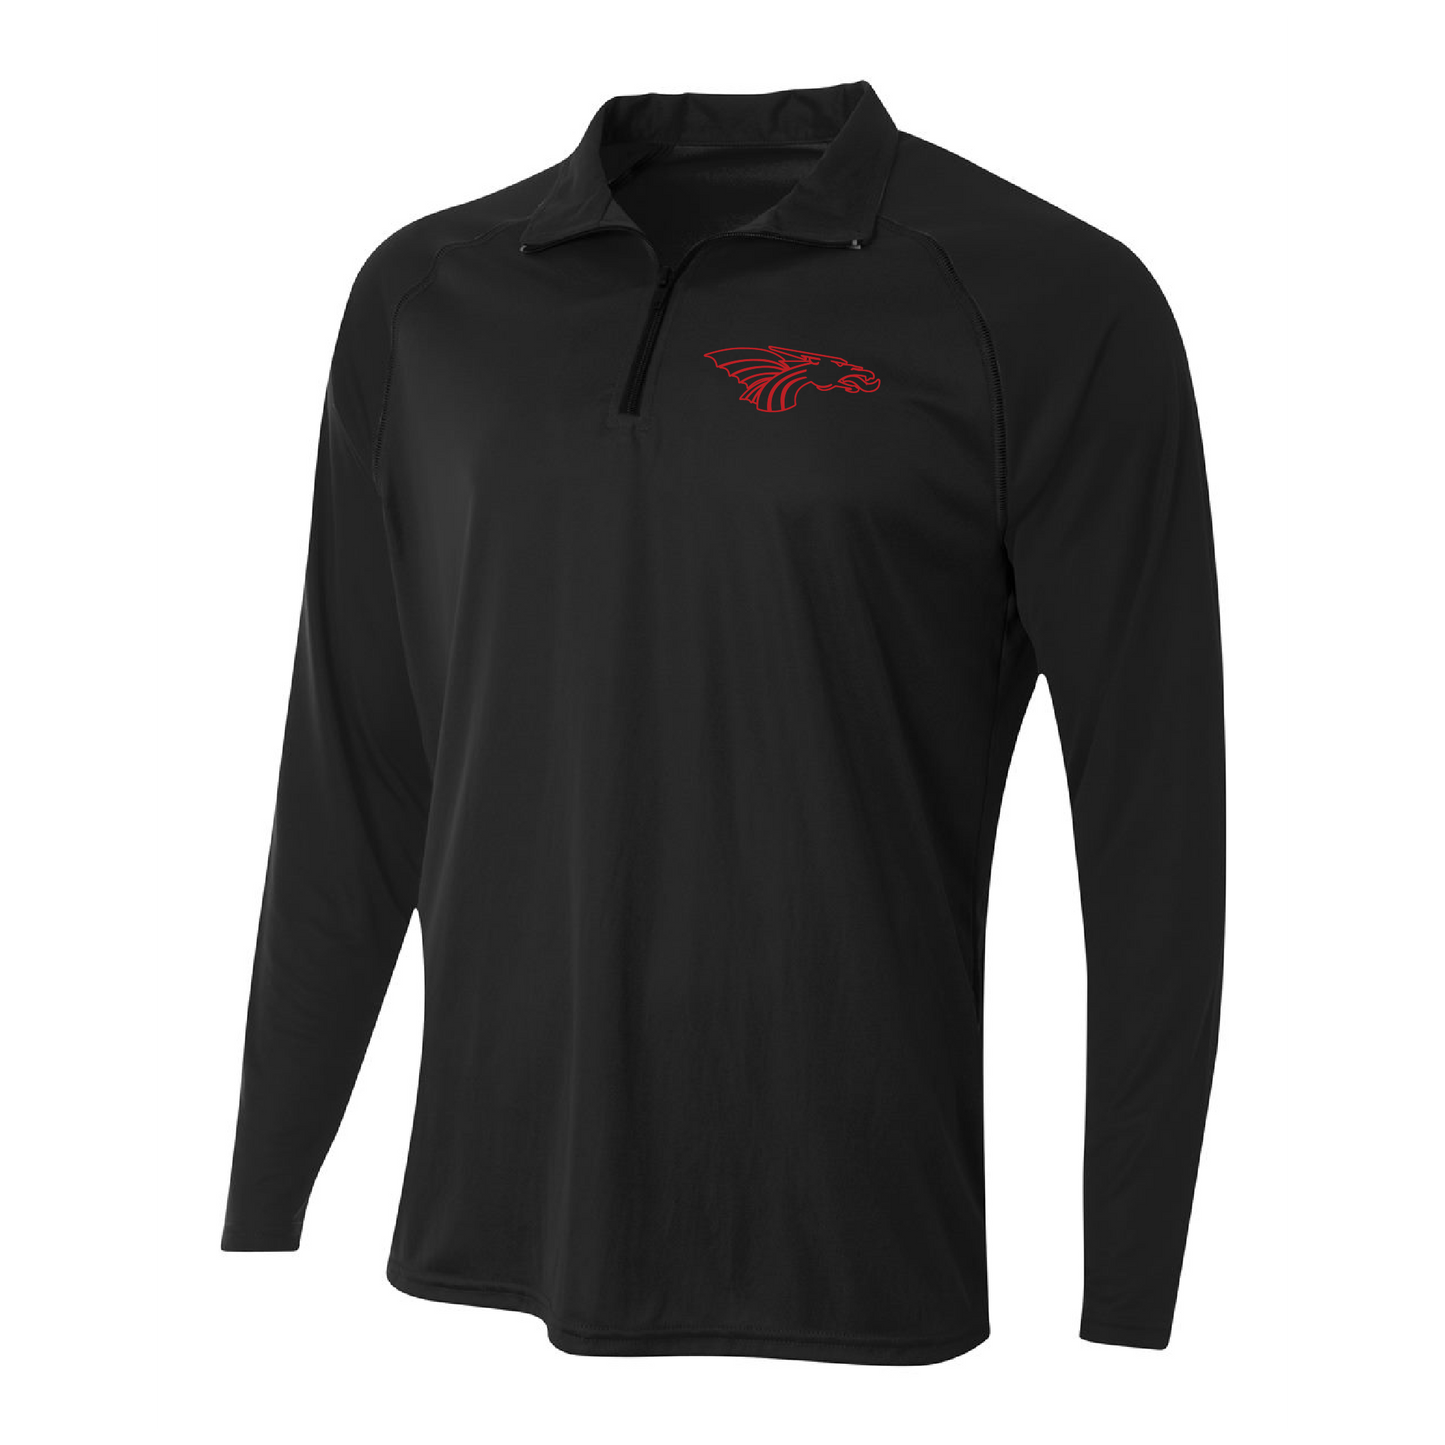 Mens Quarter Zip Pullover - Dragon Head Outlined (red)